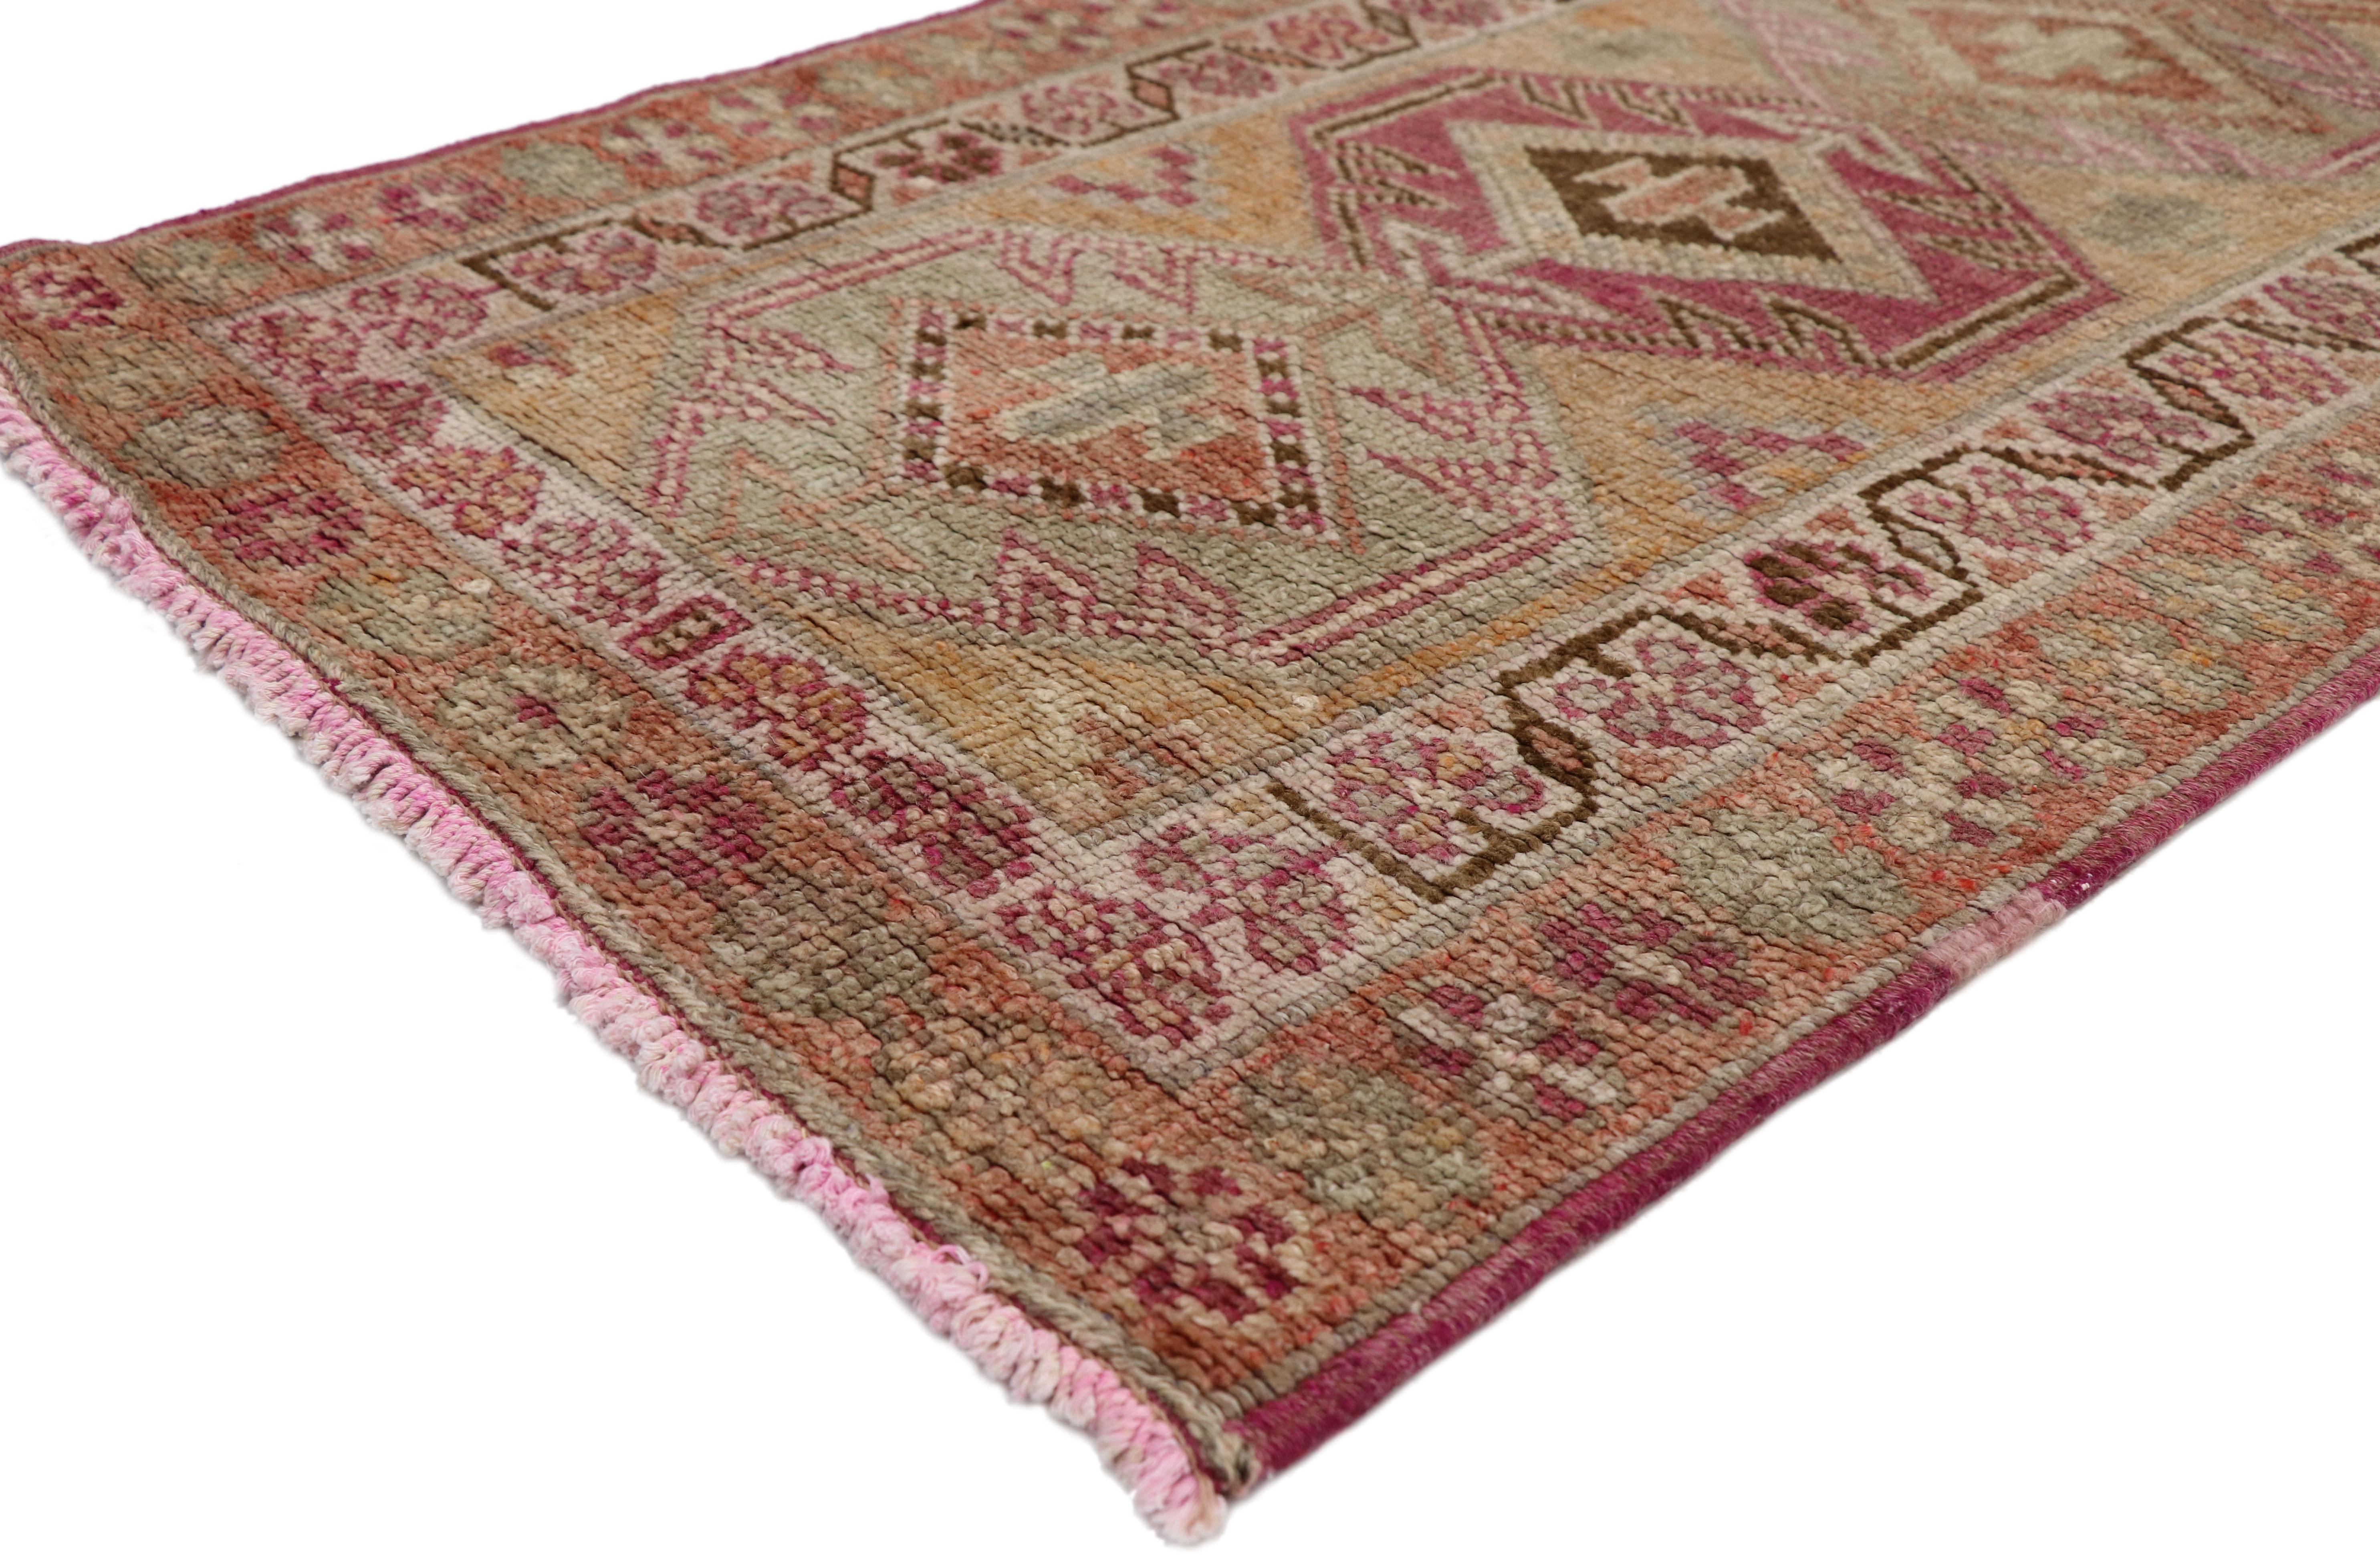 52049 Vintage Turkish Oushak Runner with Soft Pastel Colors, Hallway Runner. Create a comfortable and tasteful setting with this vintage Turkish Oushak carpet runner. With its soft pastel colors, this vintage Oushak runner is perfect for hallways,